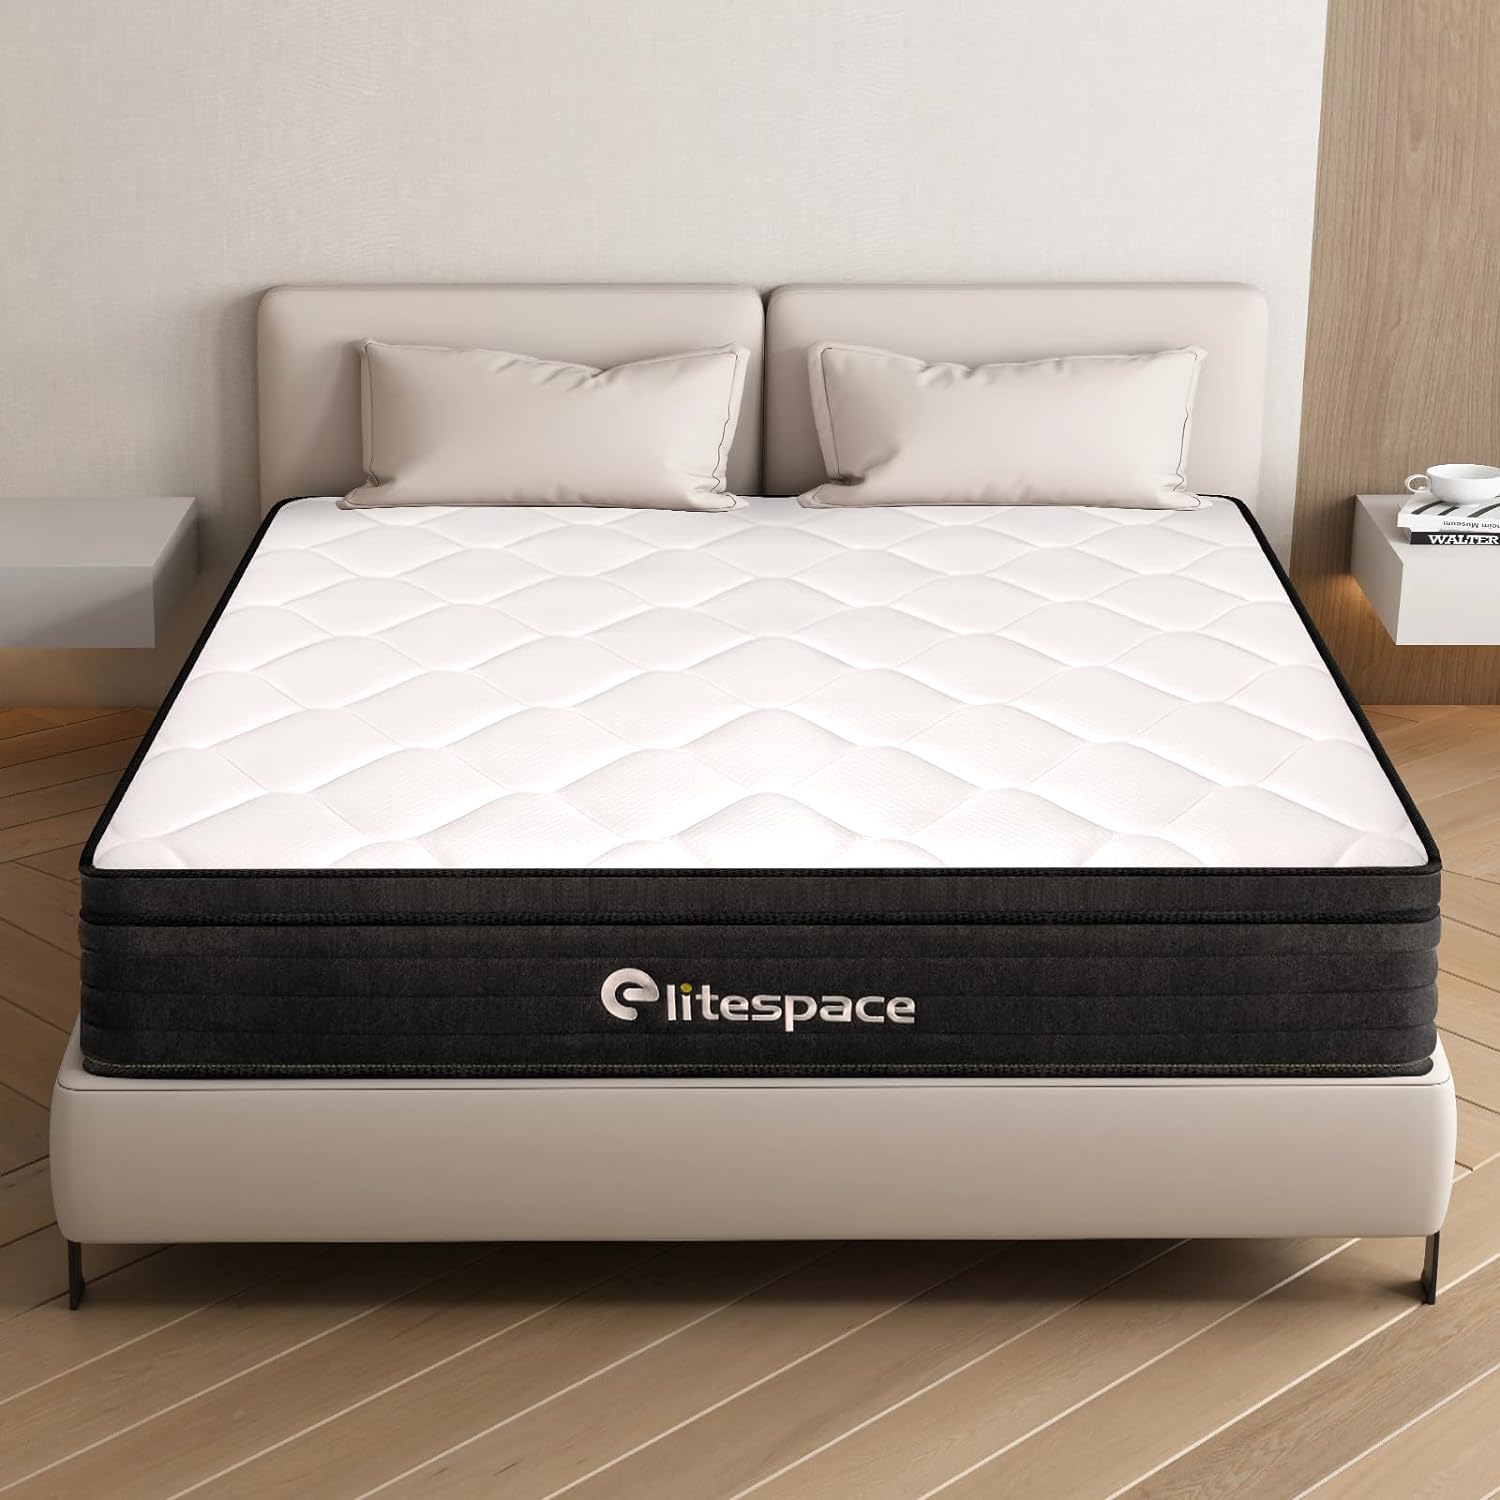 Mattress was very easy to set up. Had no smell to it! Put it in the spare room and my parents used it and said it was very comfortable! Very affordable and very nice!